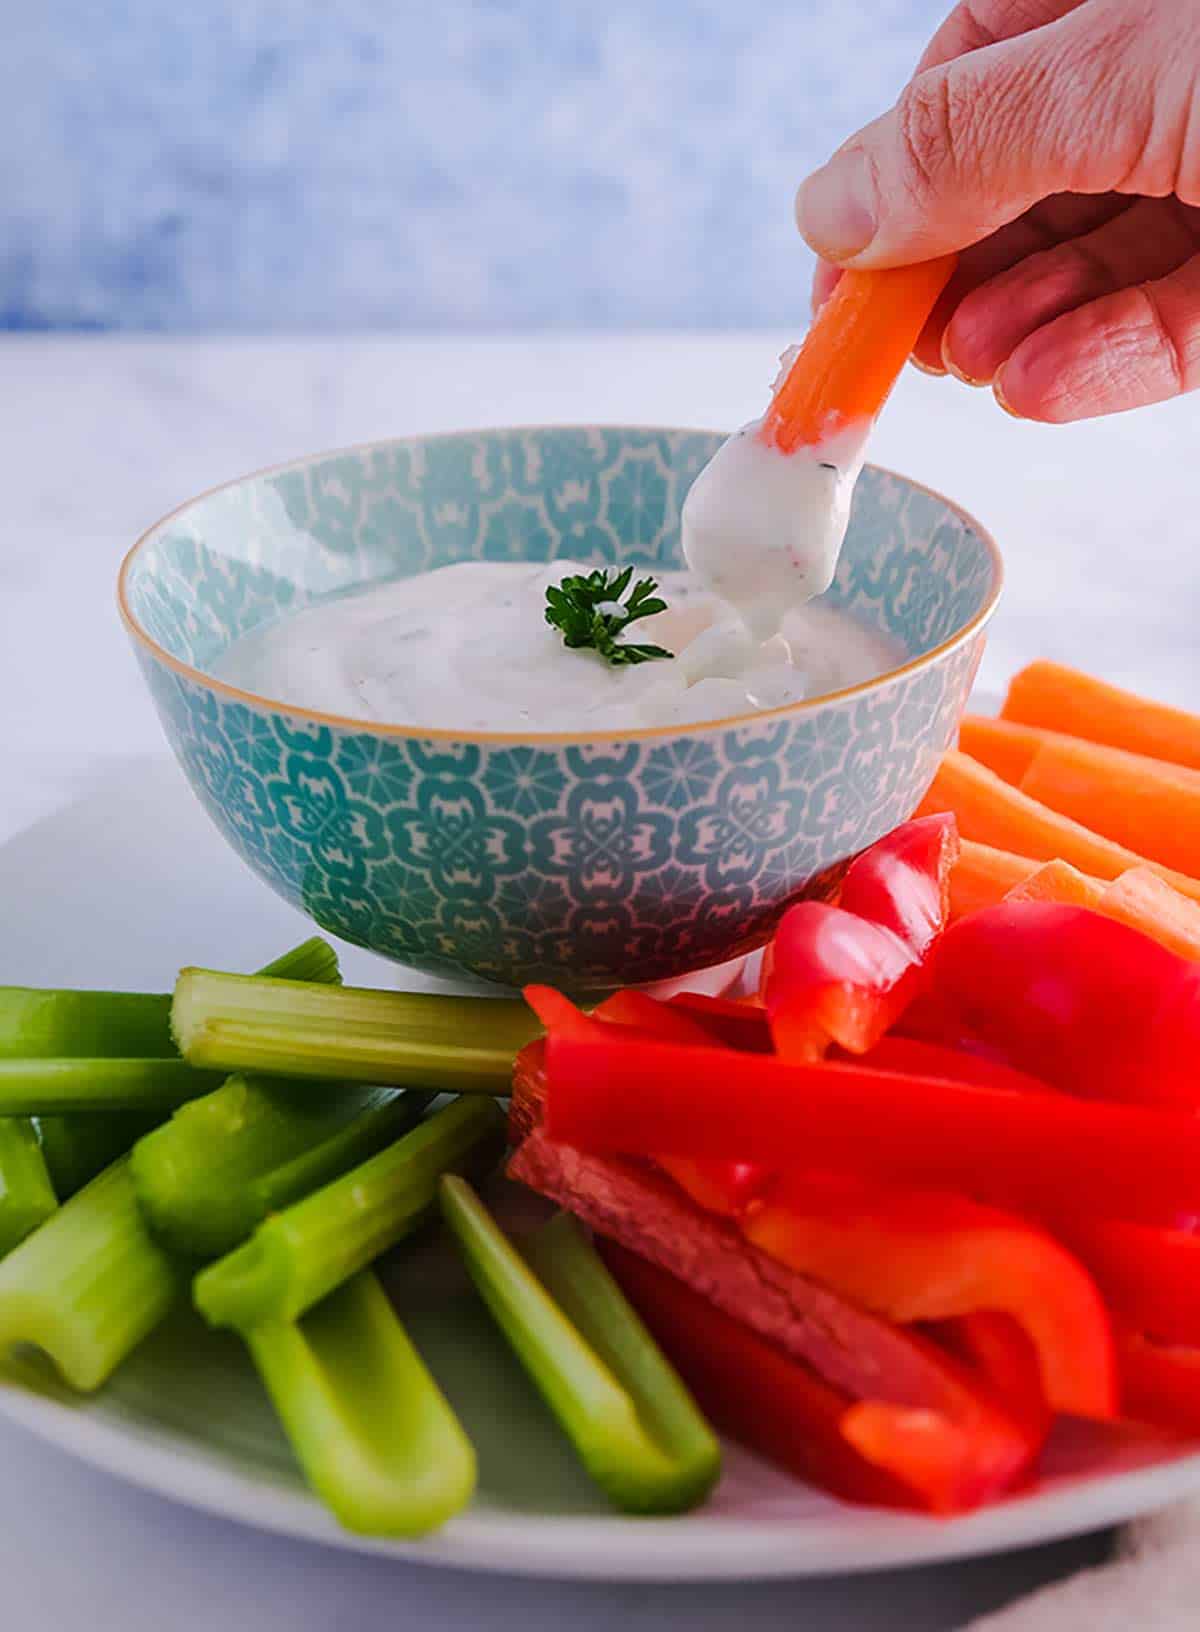 A carrot stick being dipped into a bowl of ranch dip